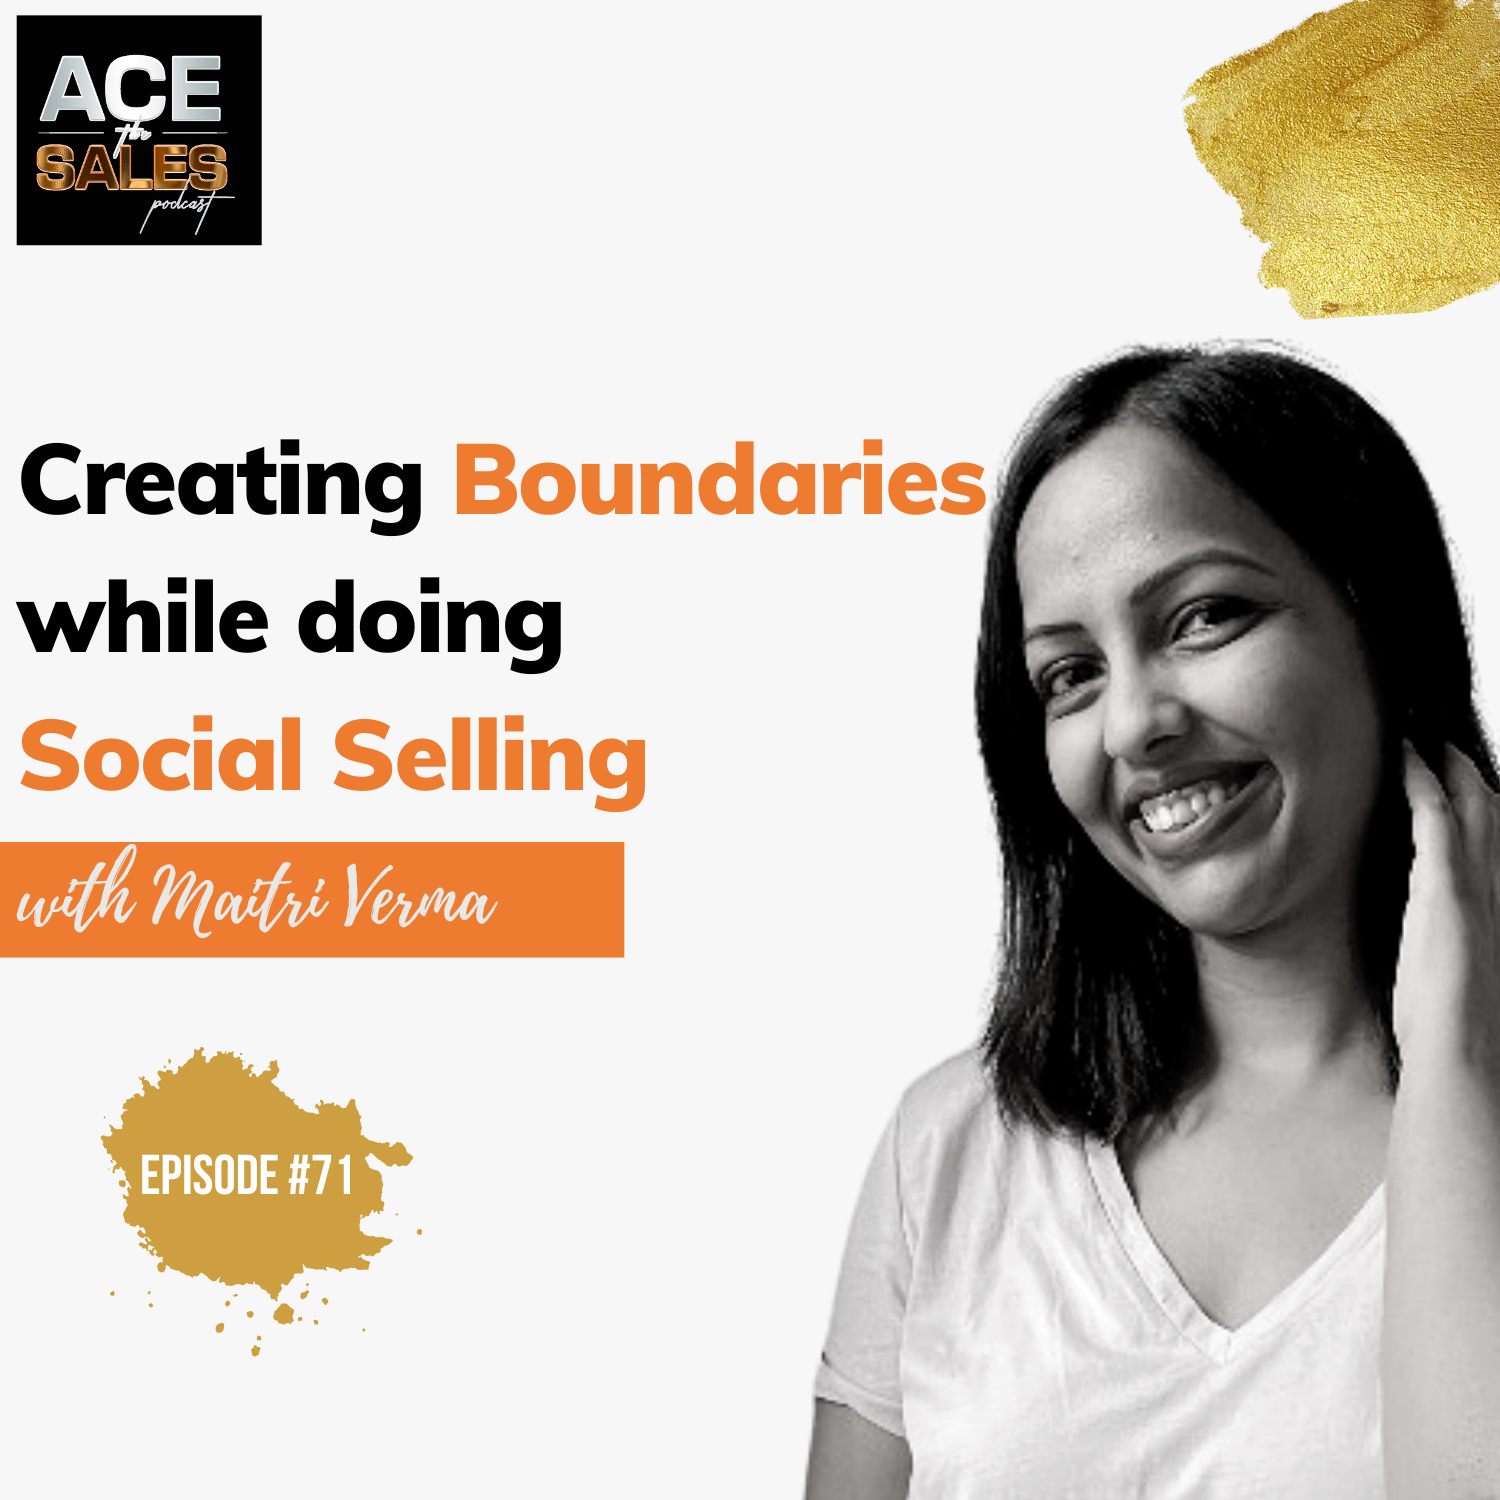 How to sell effectively through social media? - Maitri Verma